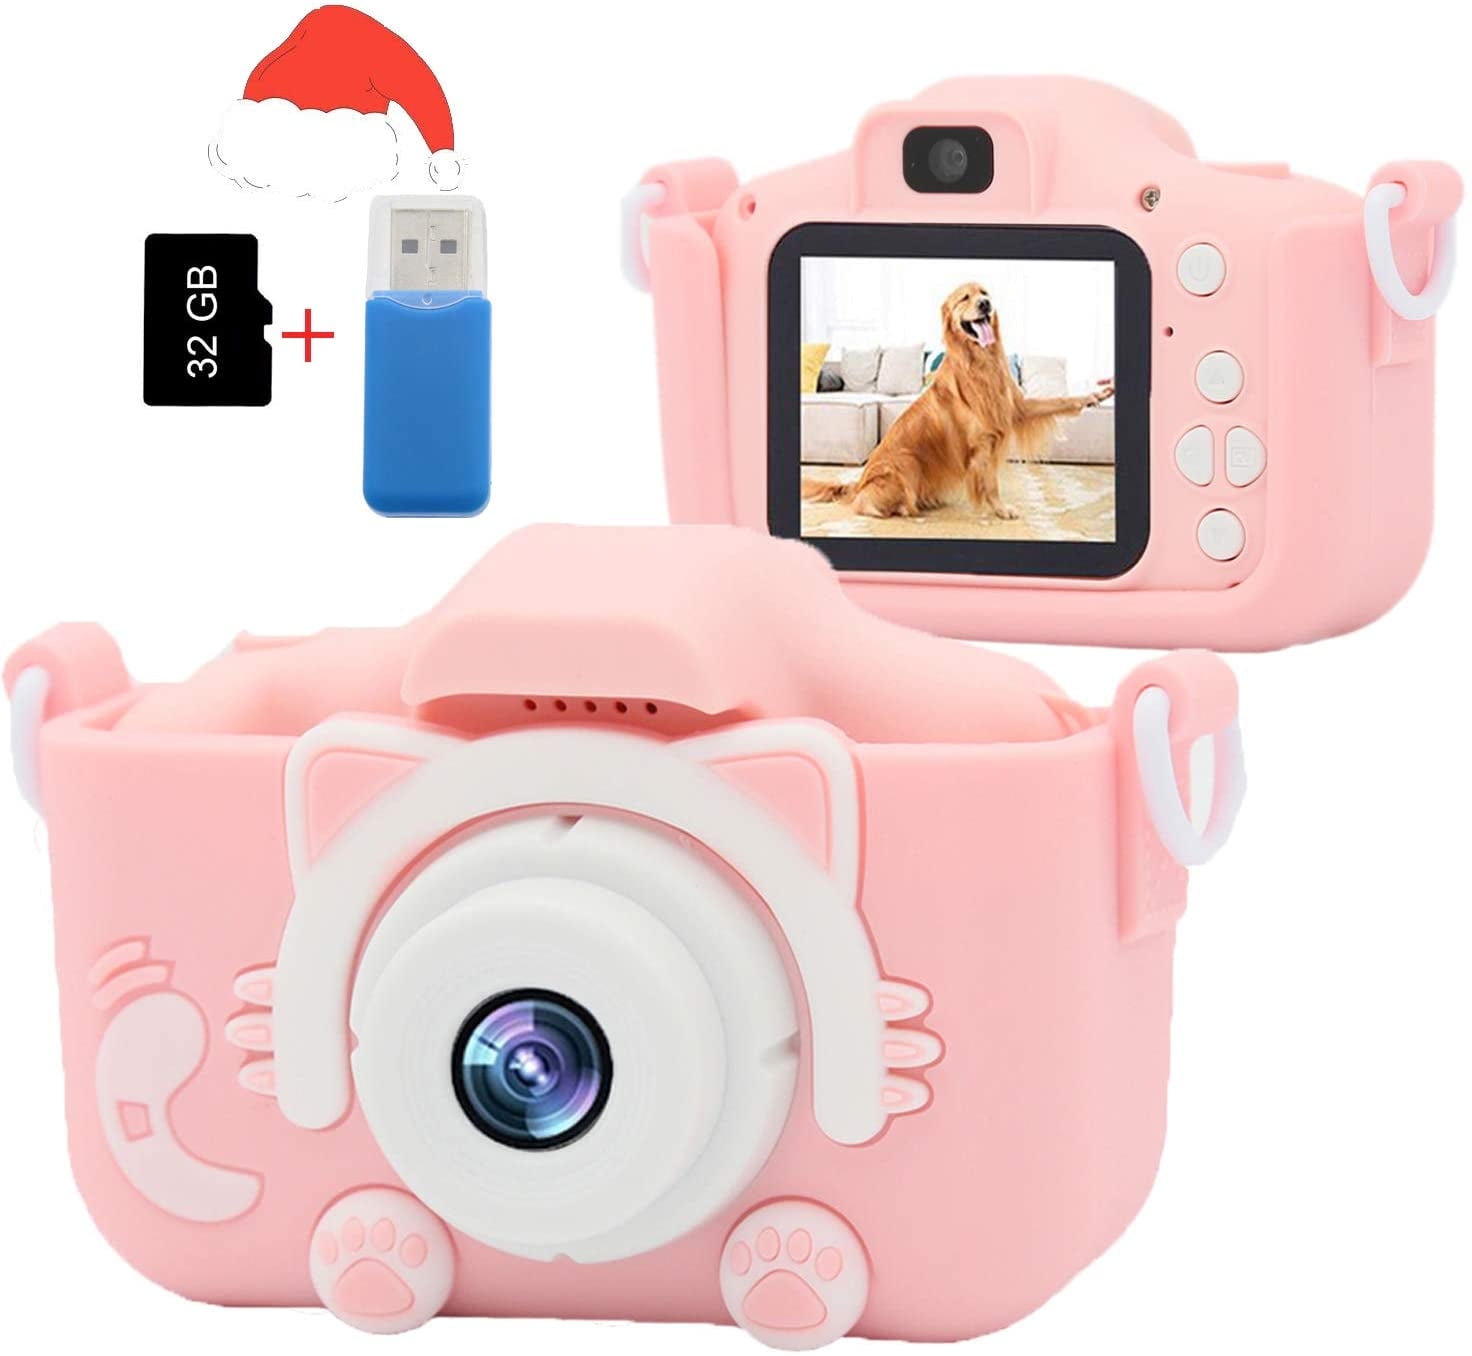 Portable Selfie Camera with 32GB SD Card Best Kids Camera Toddler Toys Gifts for 3 4 5 6 7 8 9 Year Old Boys and Girls Kids Digital Camera with Flip Lens HD Digital Video Cameras for Toddler 